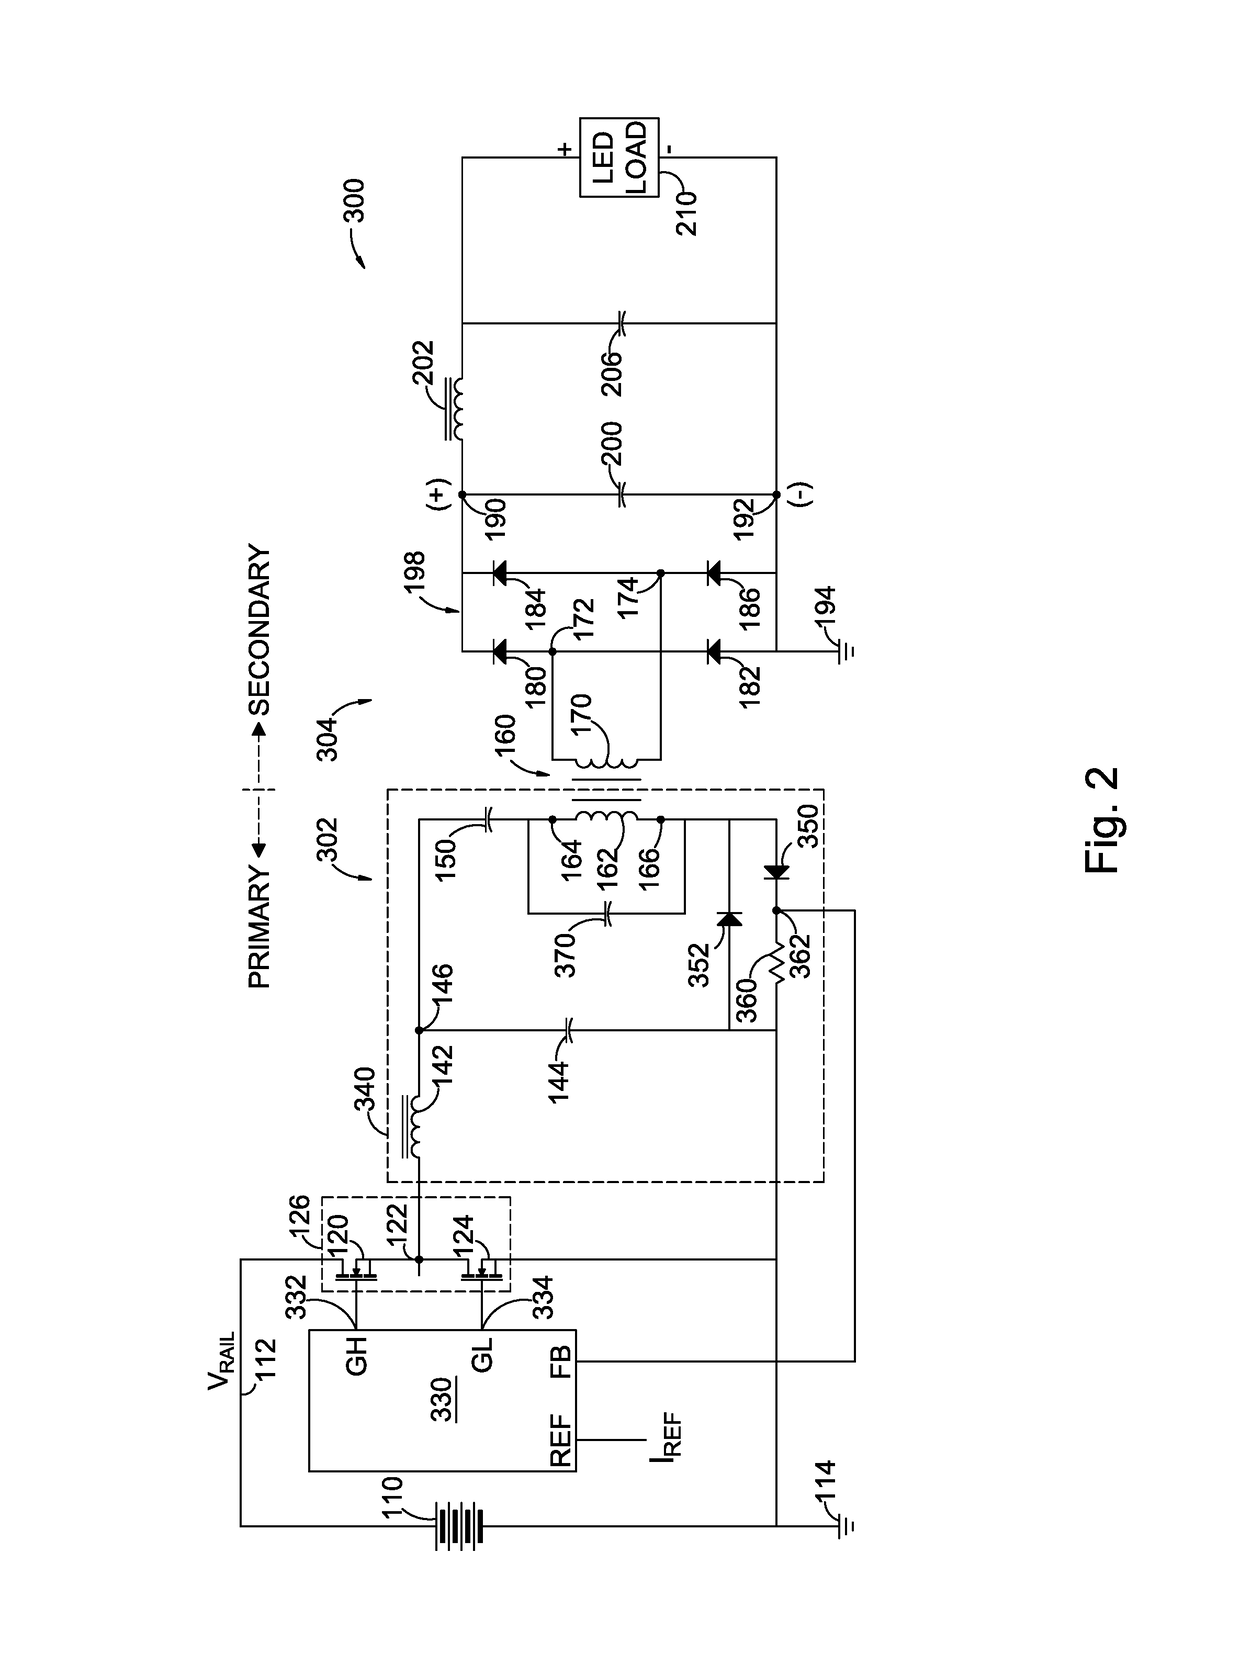 Primary current sensing method for isolated LED driver